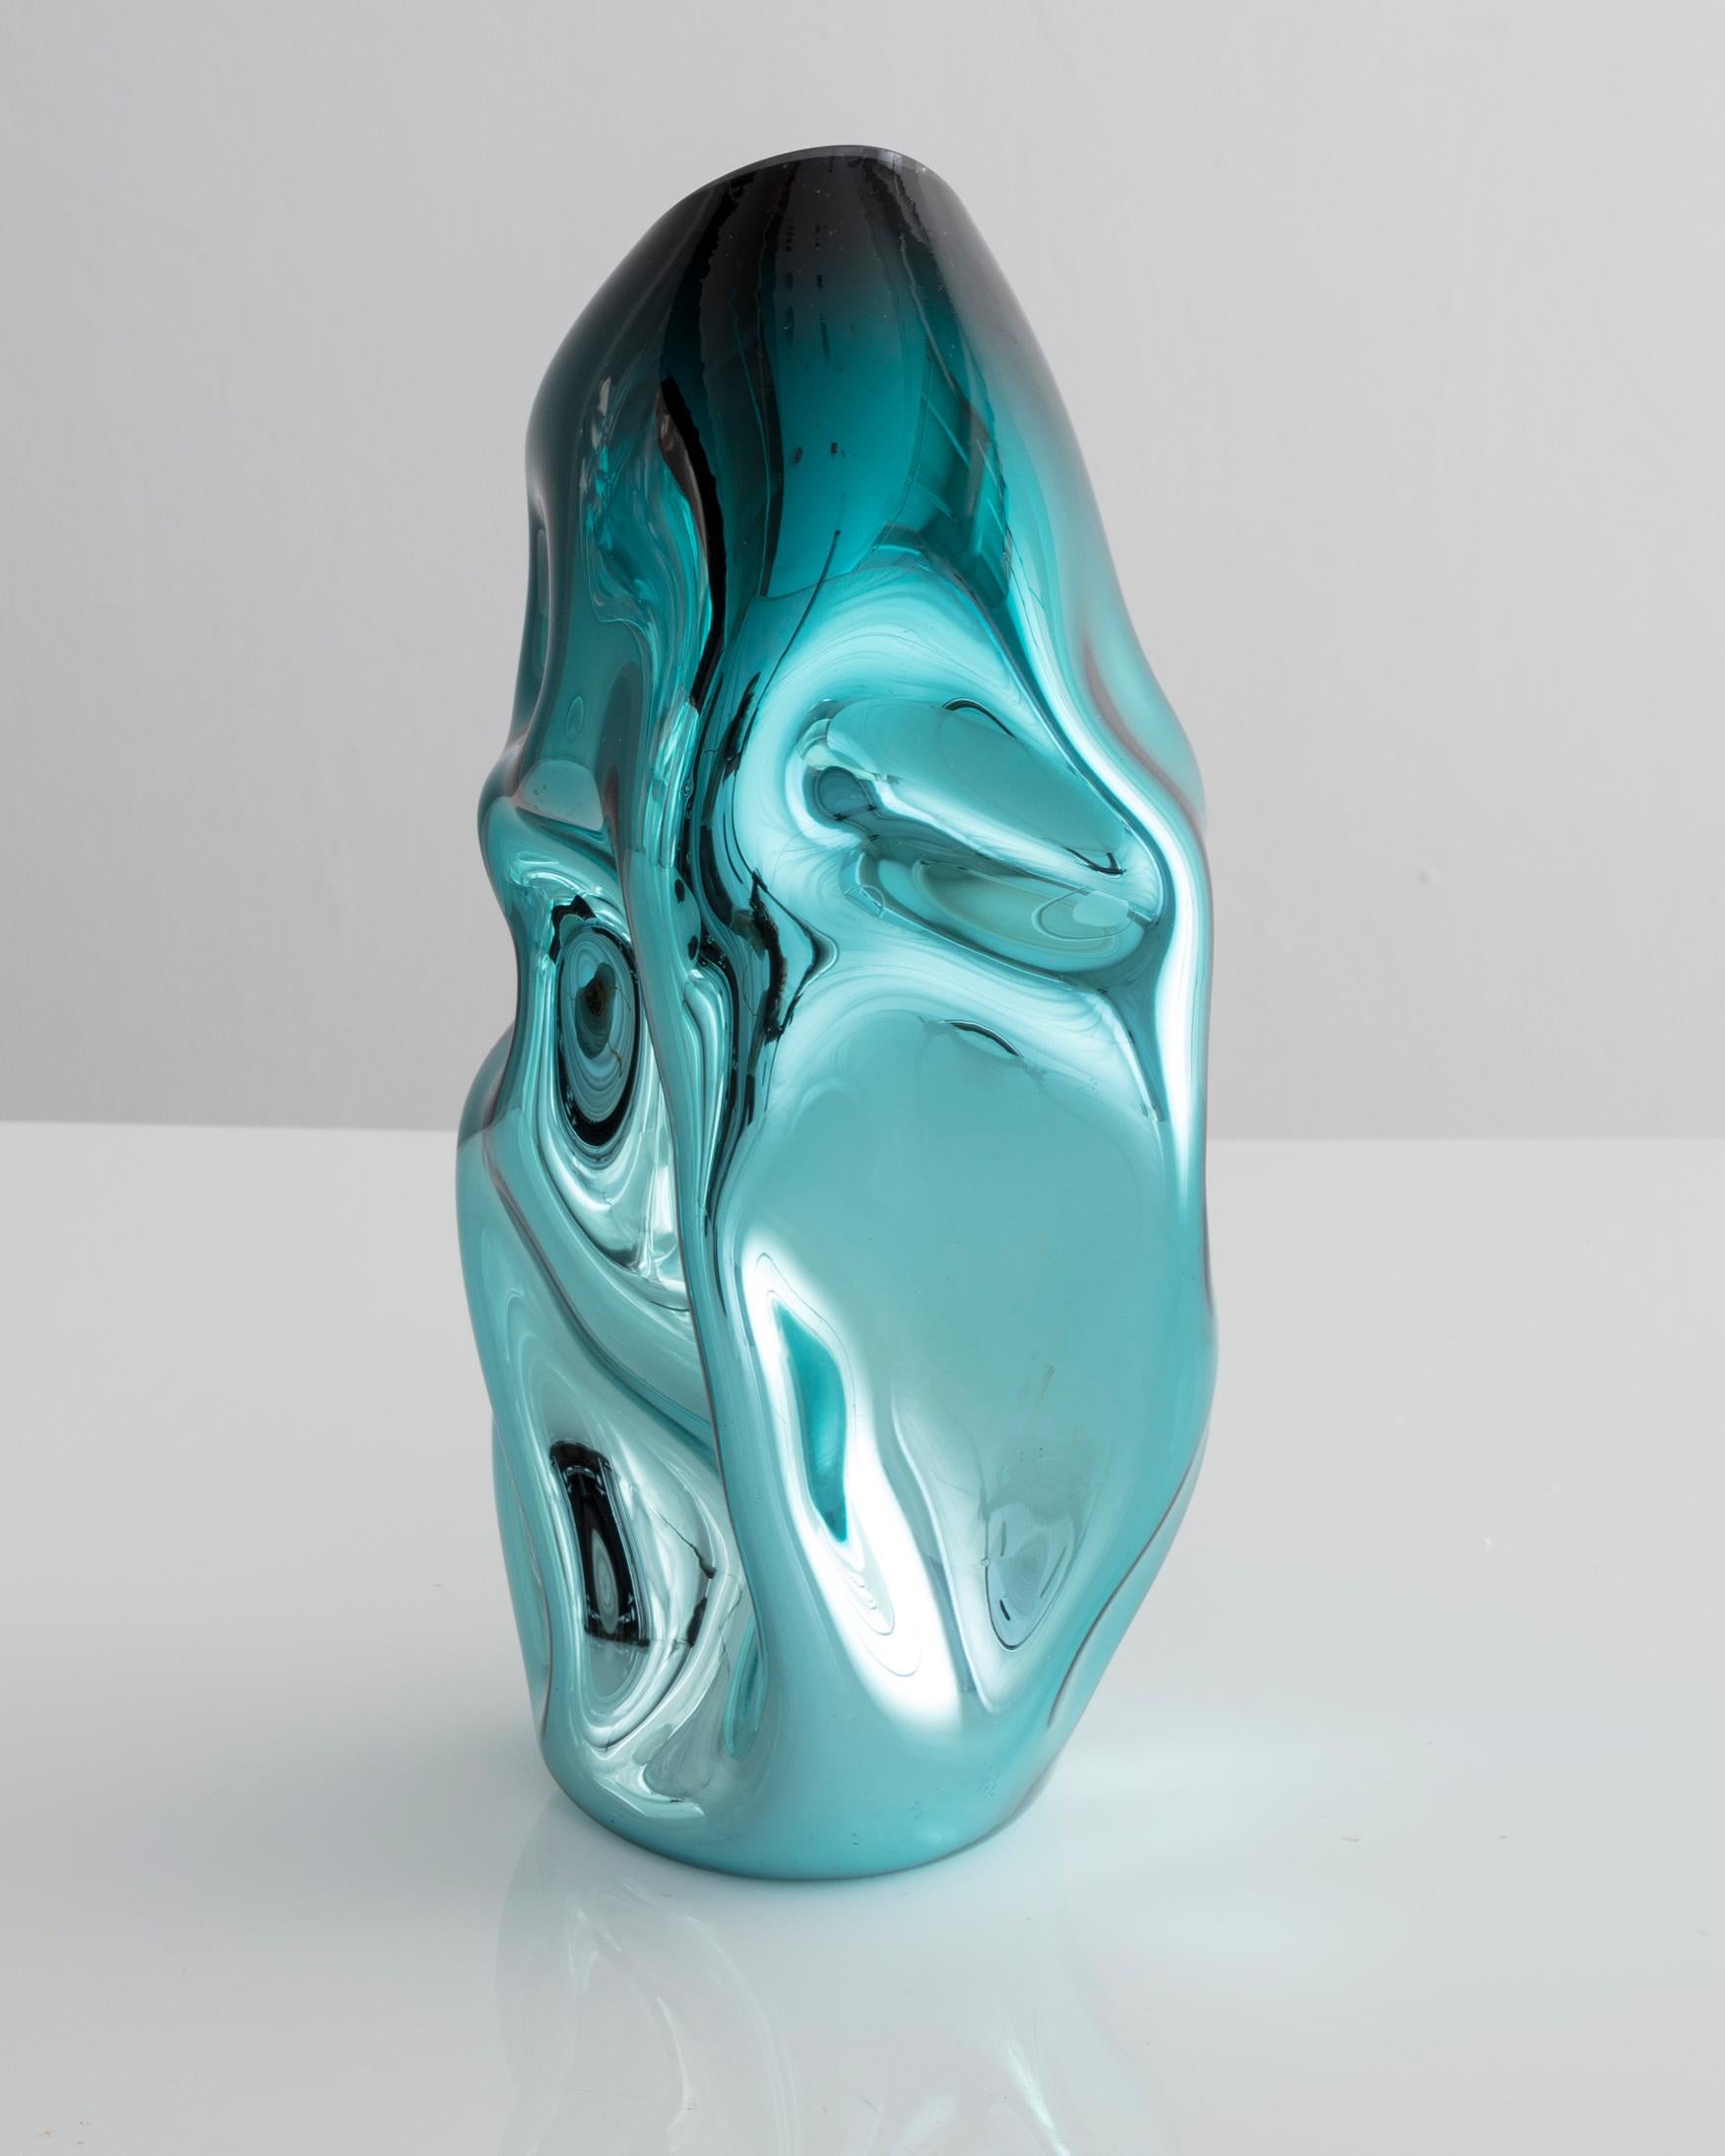 Modern Petit Crumpled Vessel in Silver and Turquoise Hand Blown Glass by Jeff Zimmerman